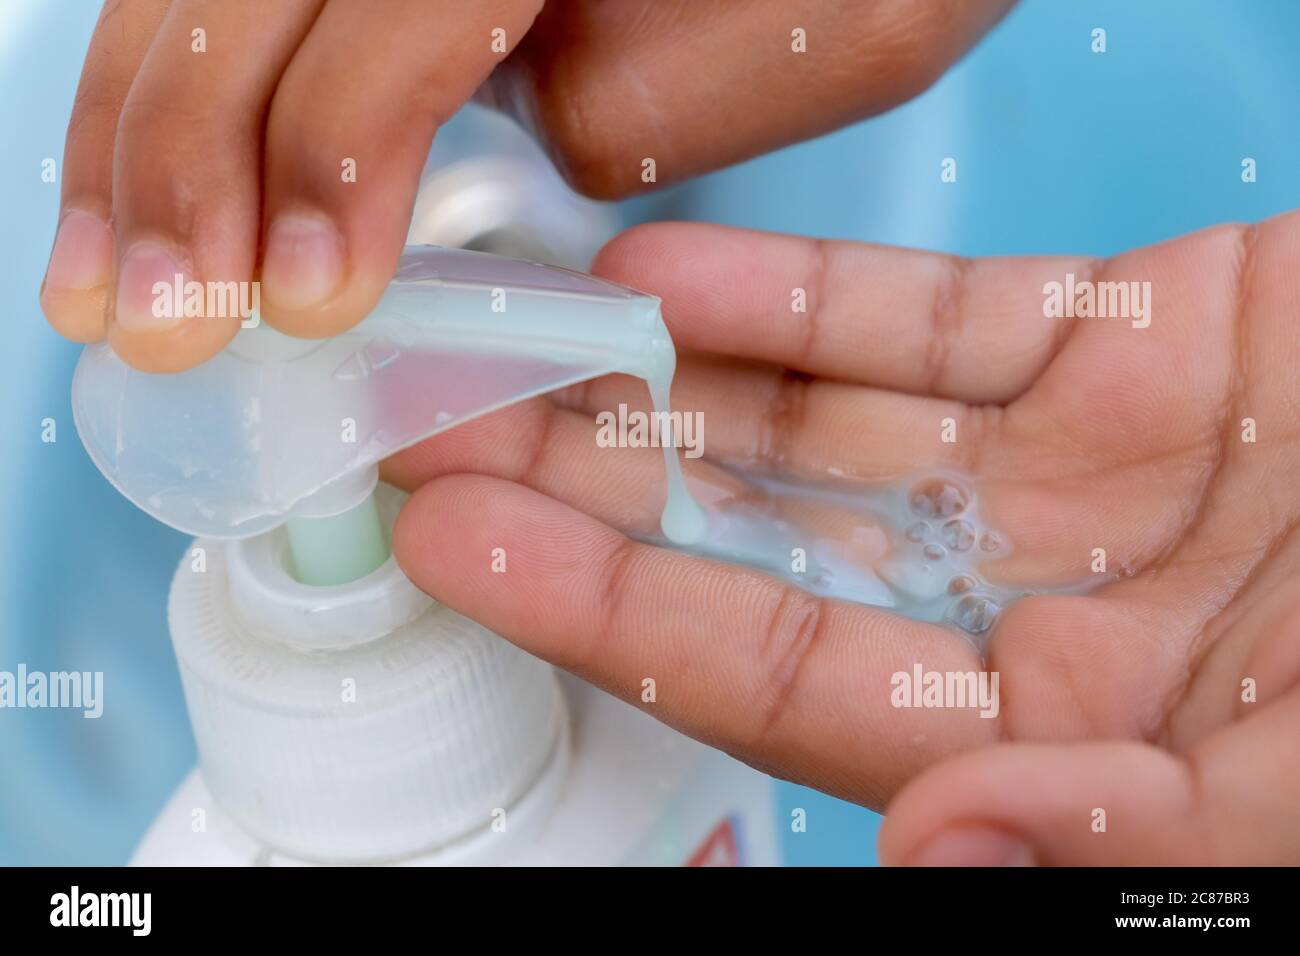 Hand takes liquid soap from a soap dispenser to wash hands at the sink Stock Photo